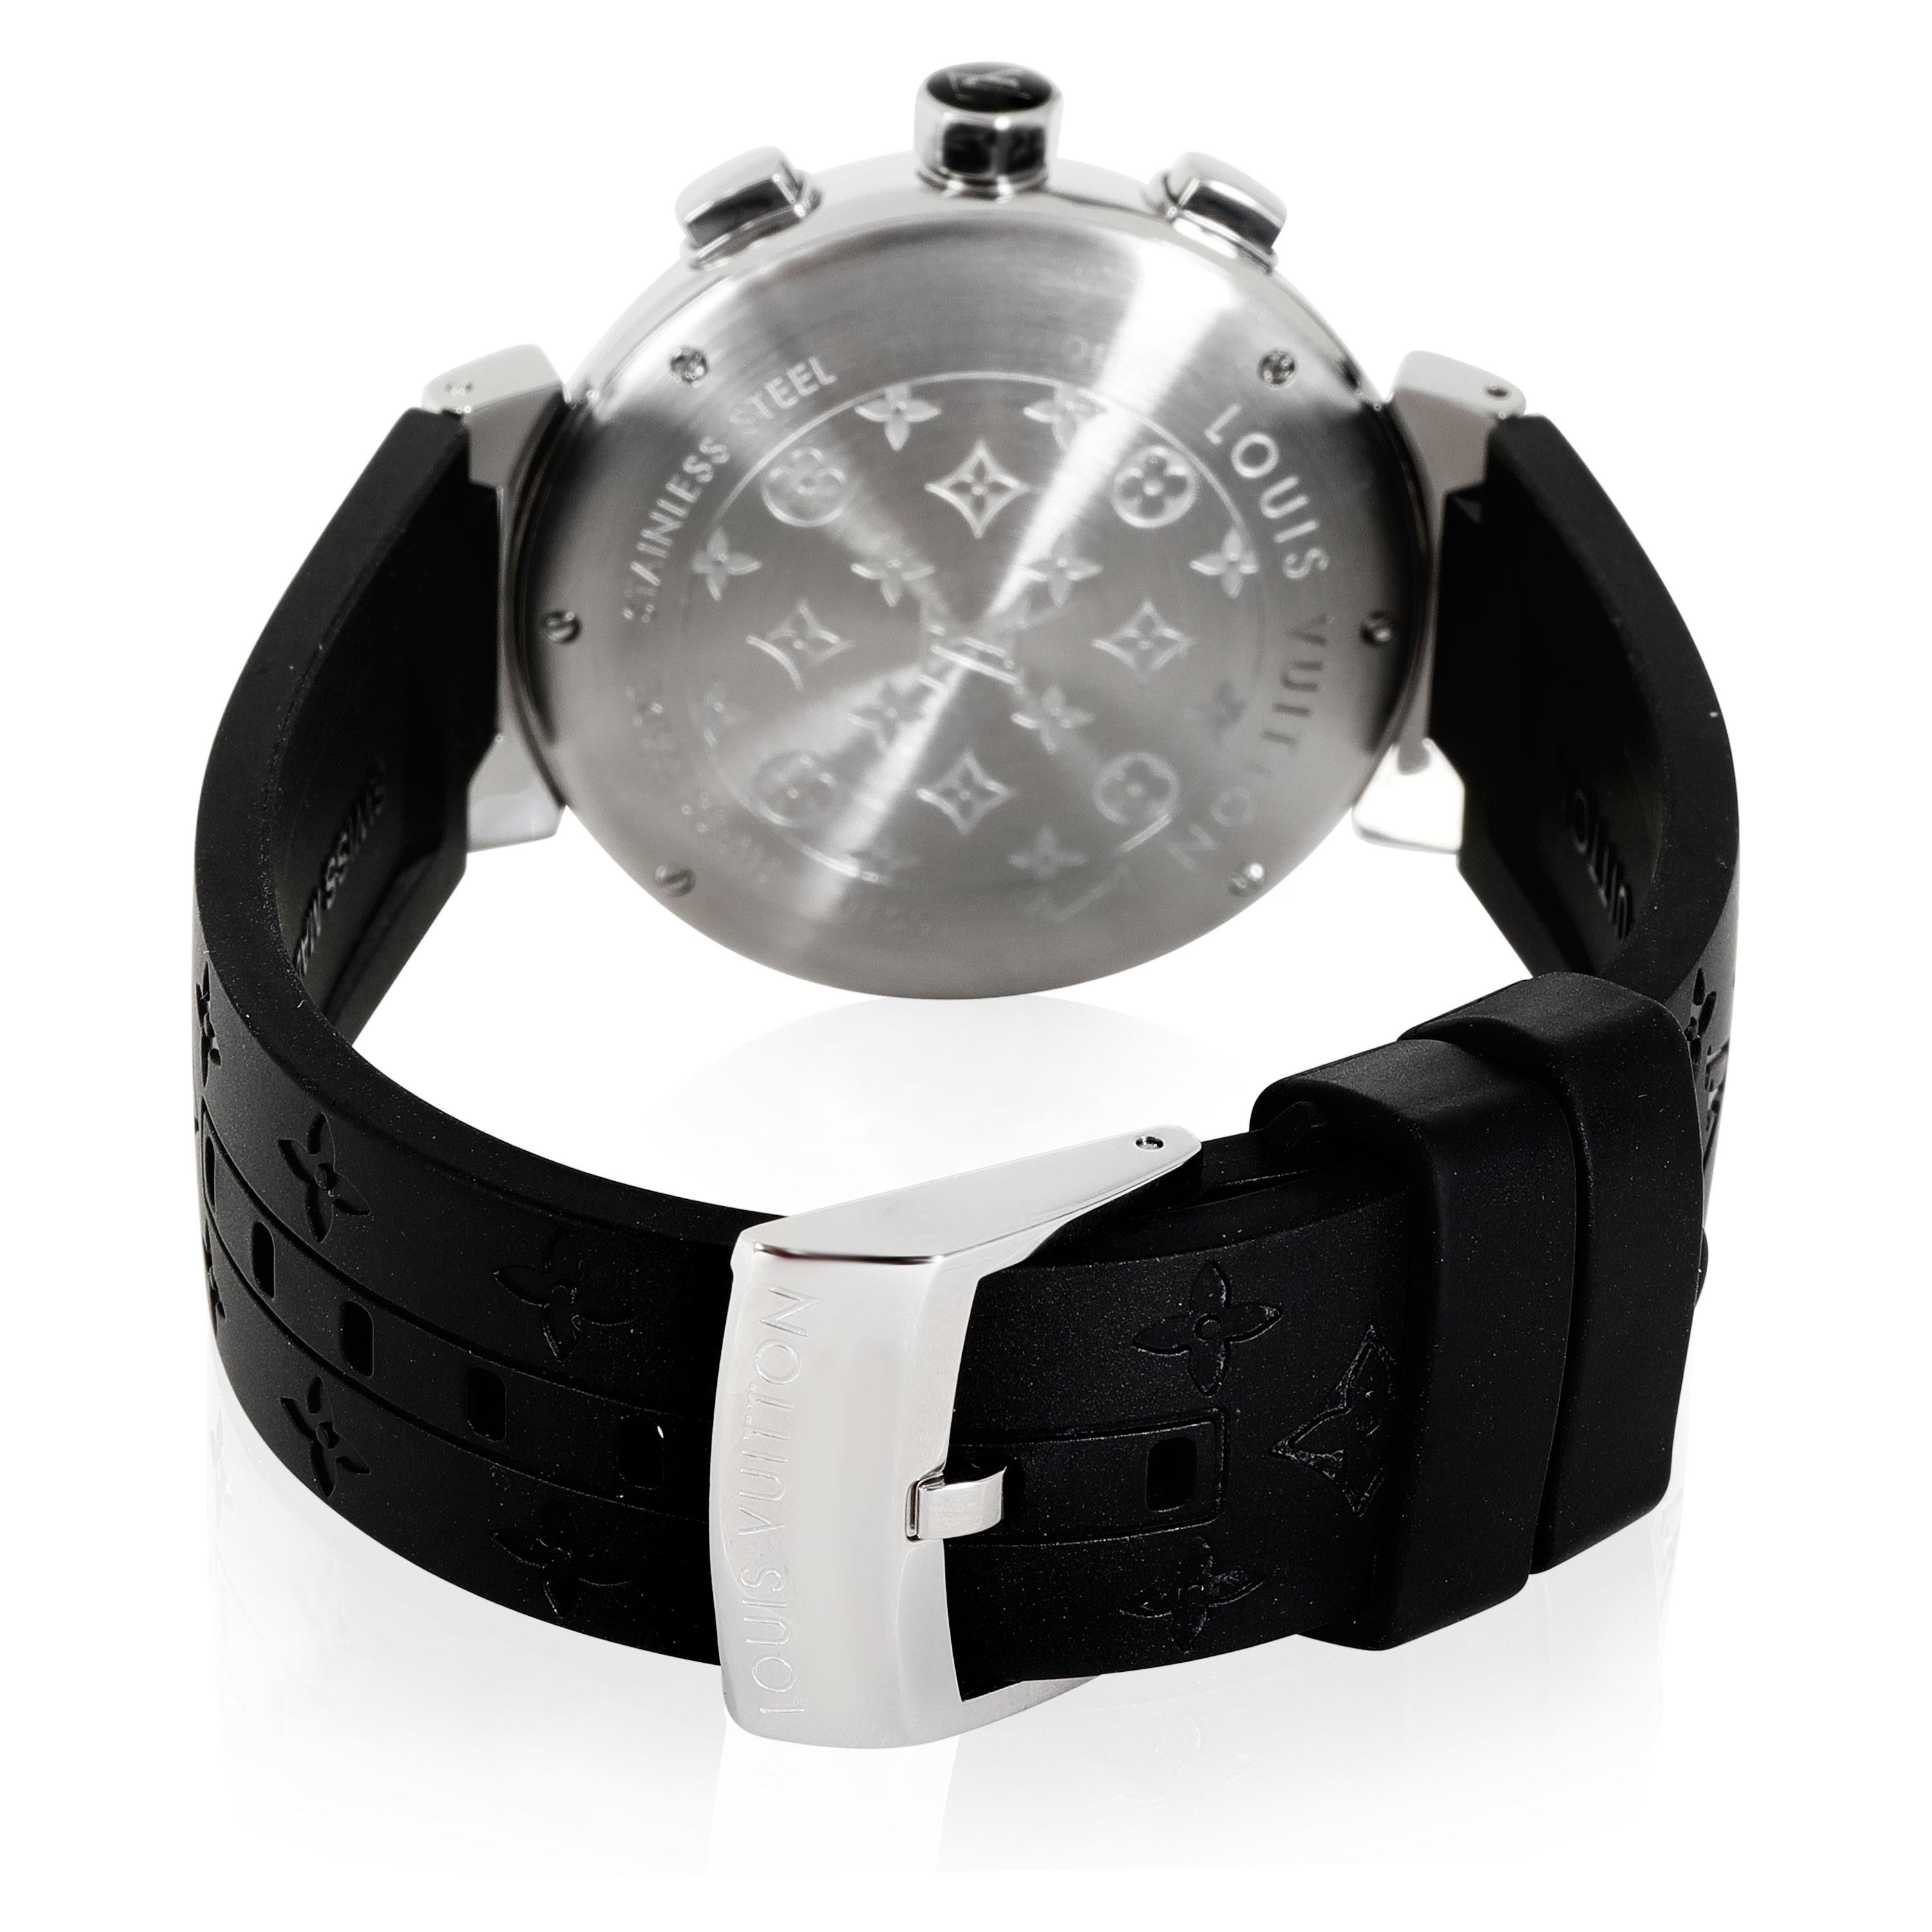 Watch Louis Vuitton Tambour World Time Runway  Tambour QBB136 Stainless  Steel - Strap Rubber